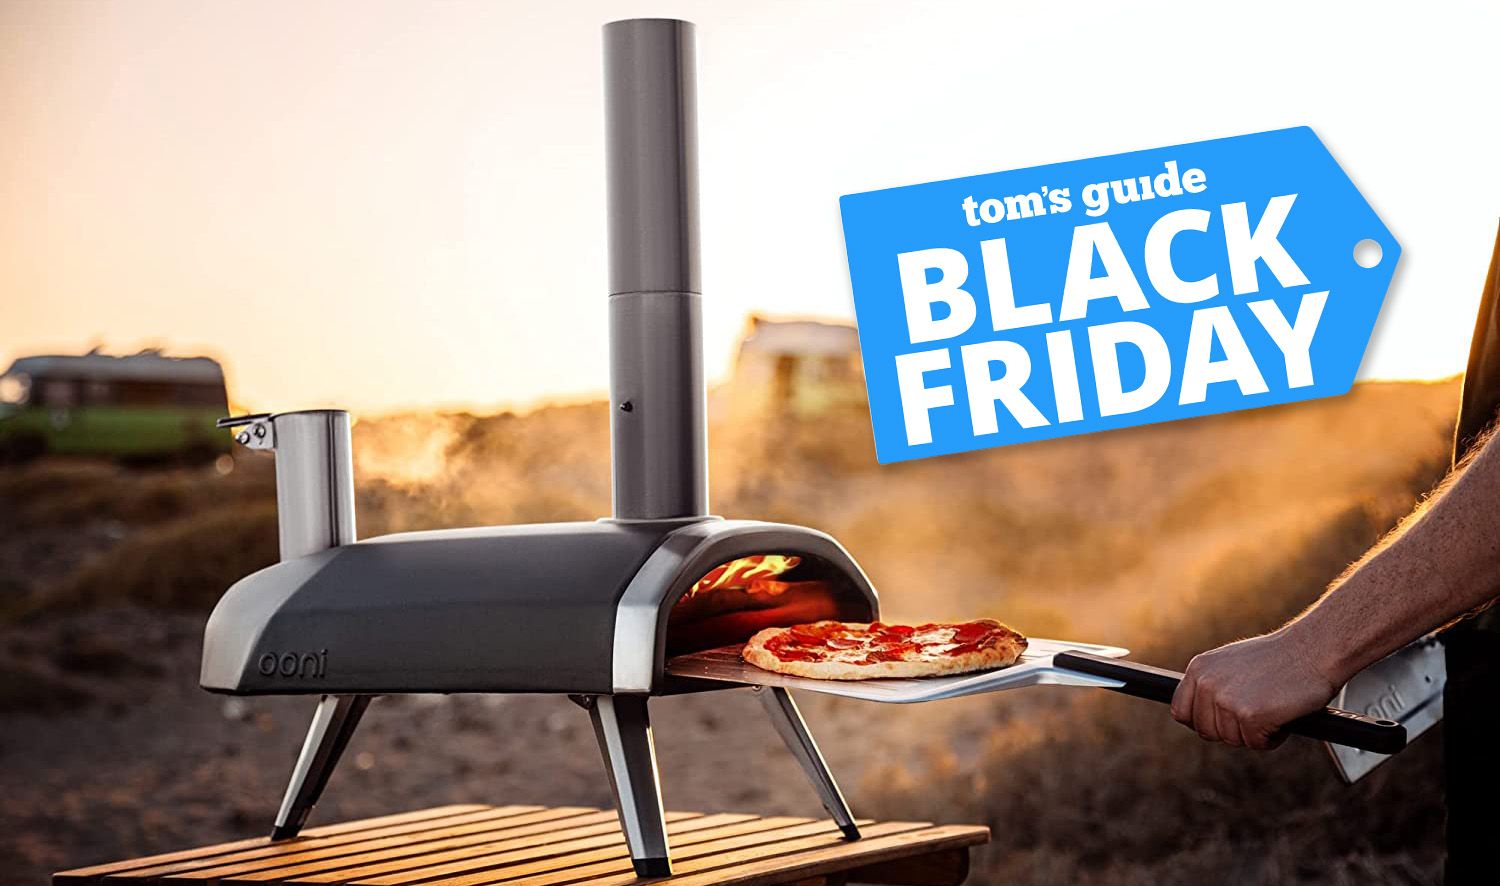 I love my Ooni pizza oven — and it’s 20 off for Black Friday Tom's Guide